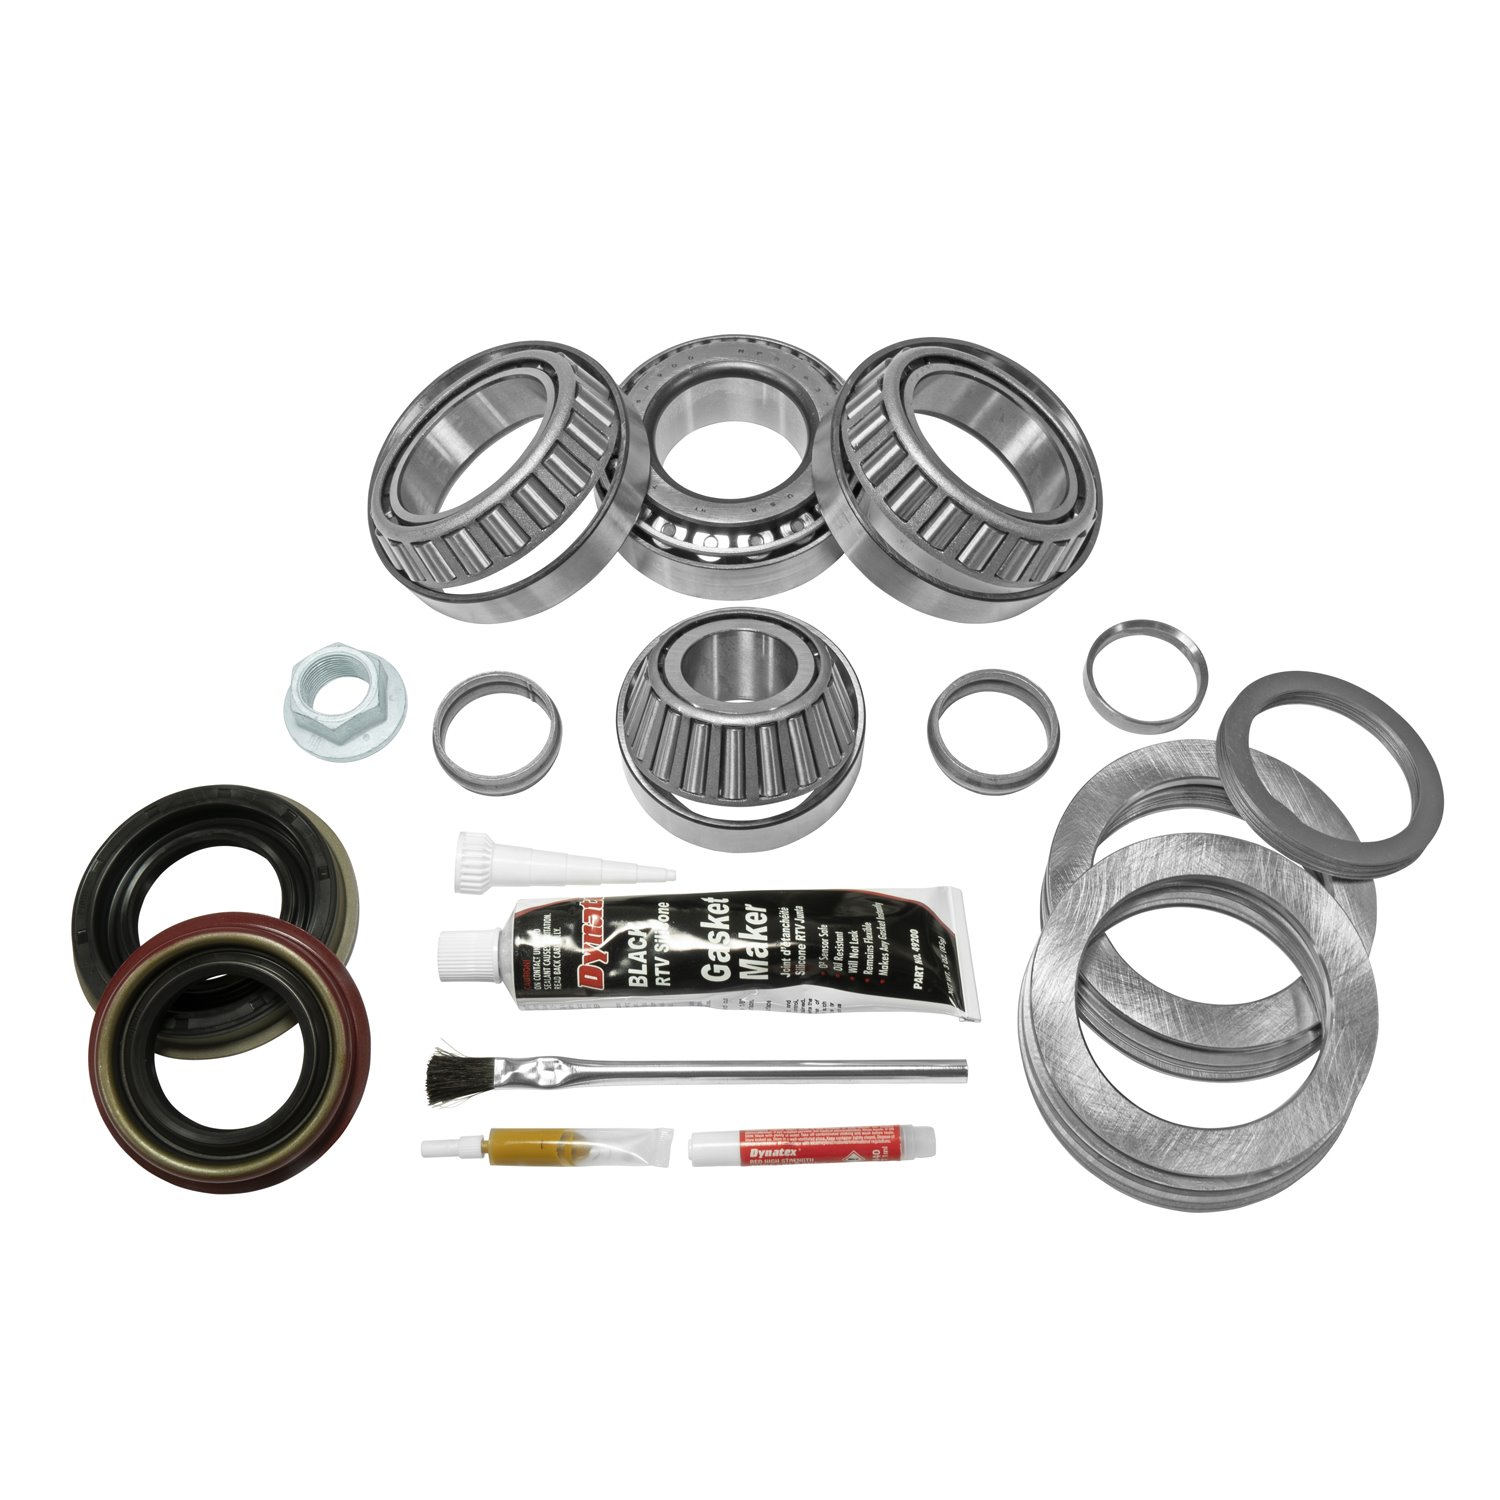 Master Overhaul Kit 1997-1998 Ford 9.75" Differential